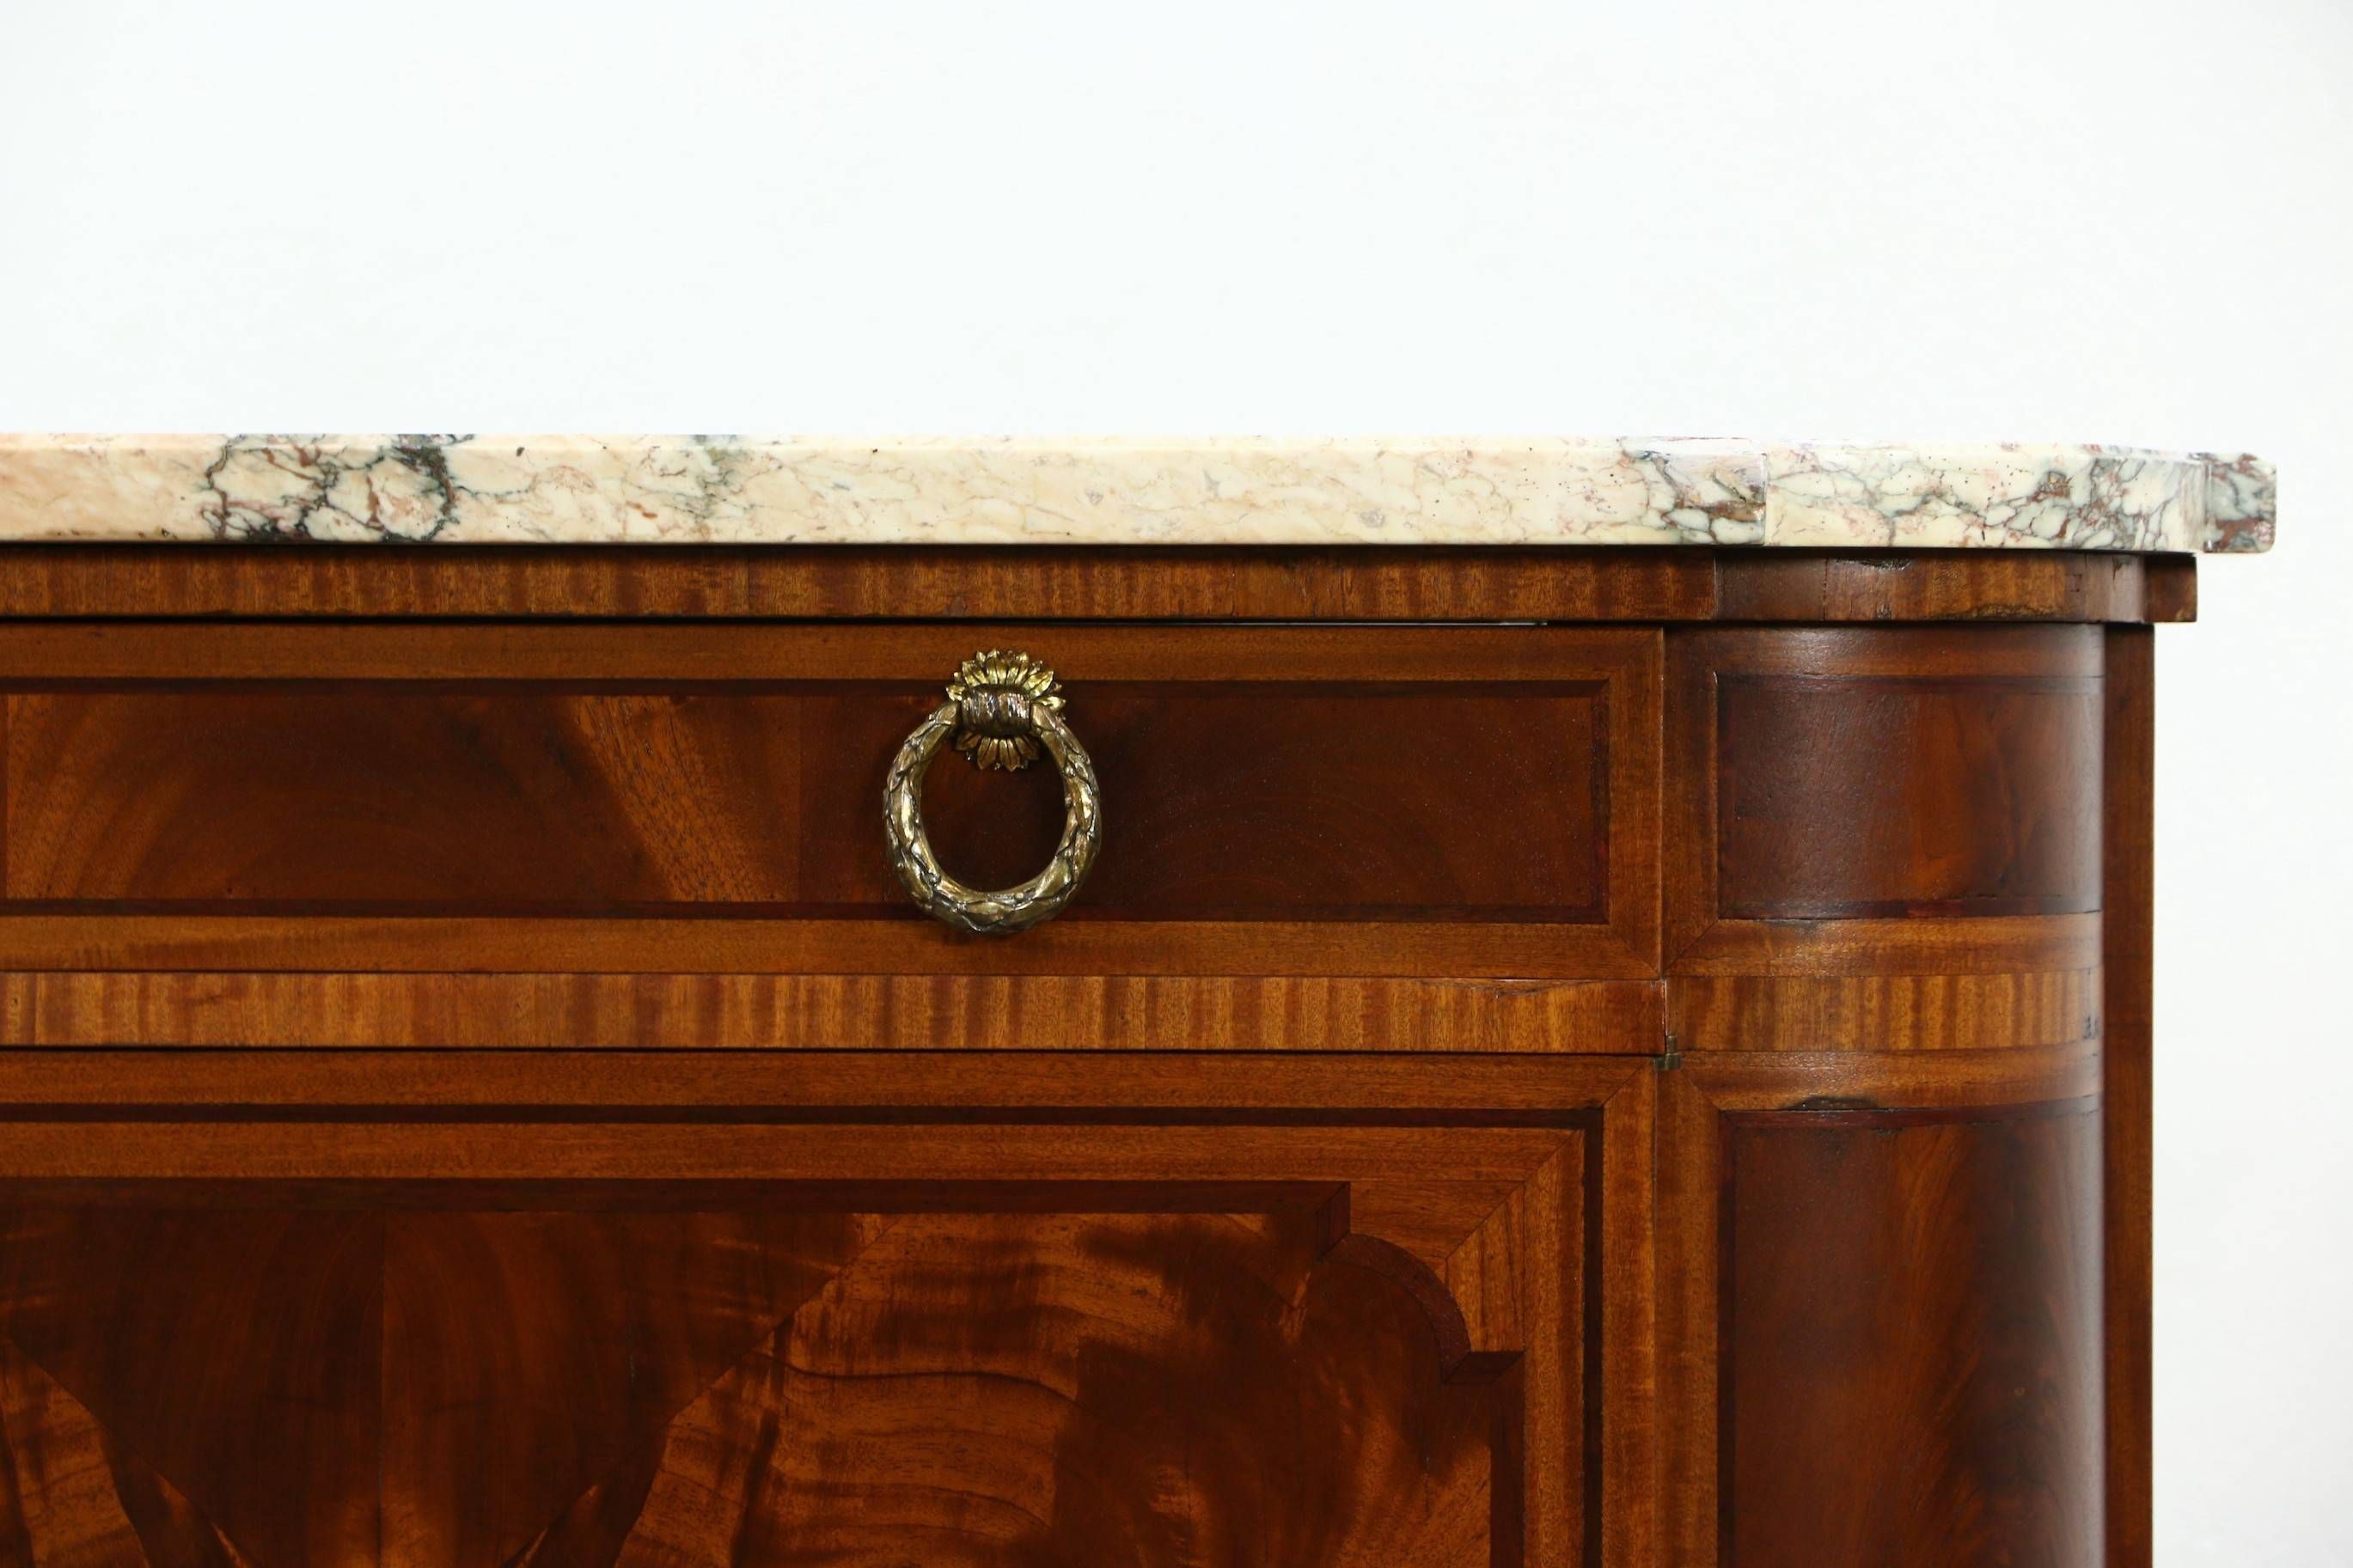 Sold – Marble Top Paris France Signed 1930 Vintage Sideboard Inside Newest Vintage Sideboards And Buffets (View 14 of 15)